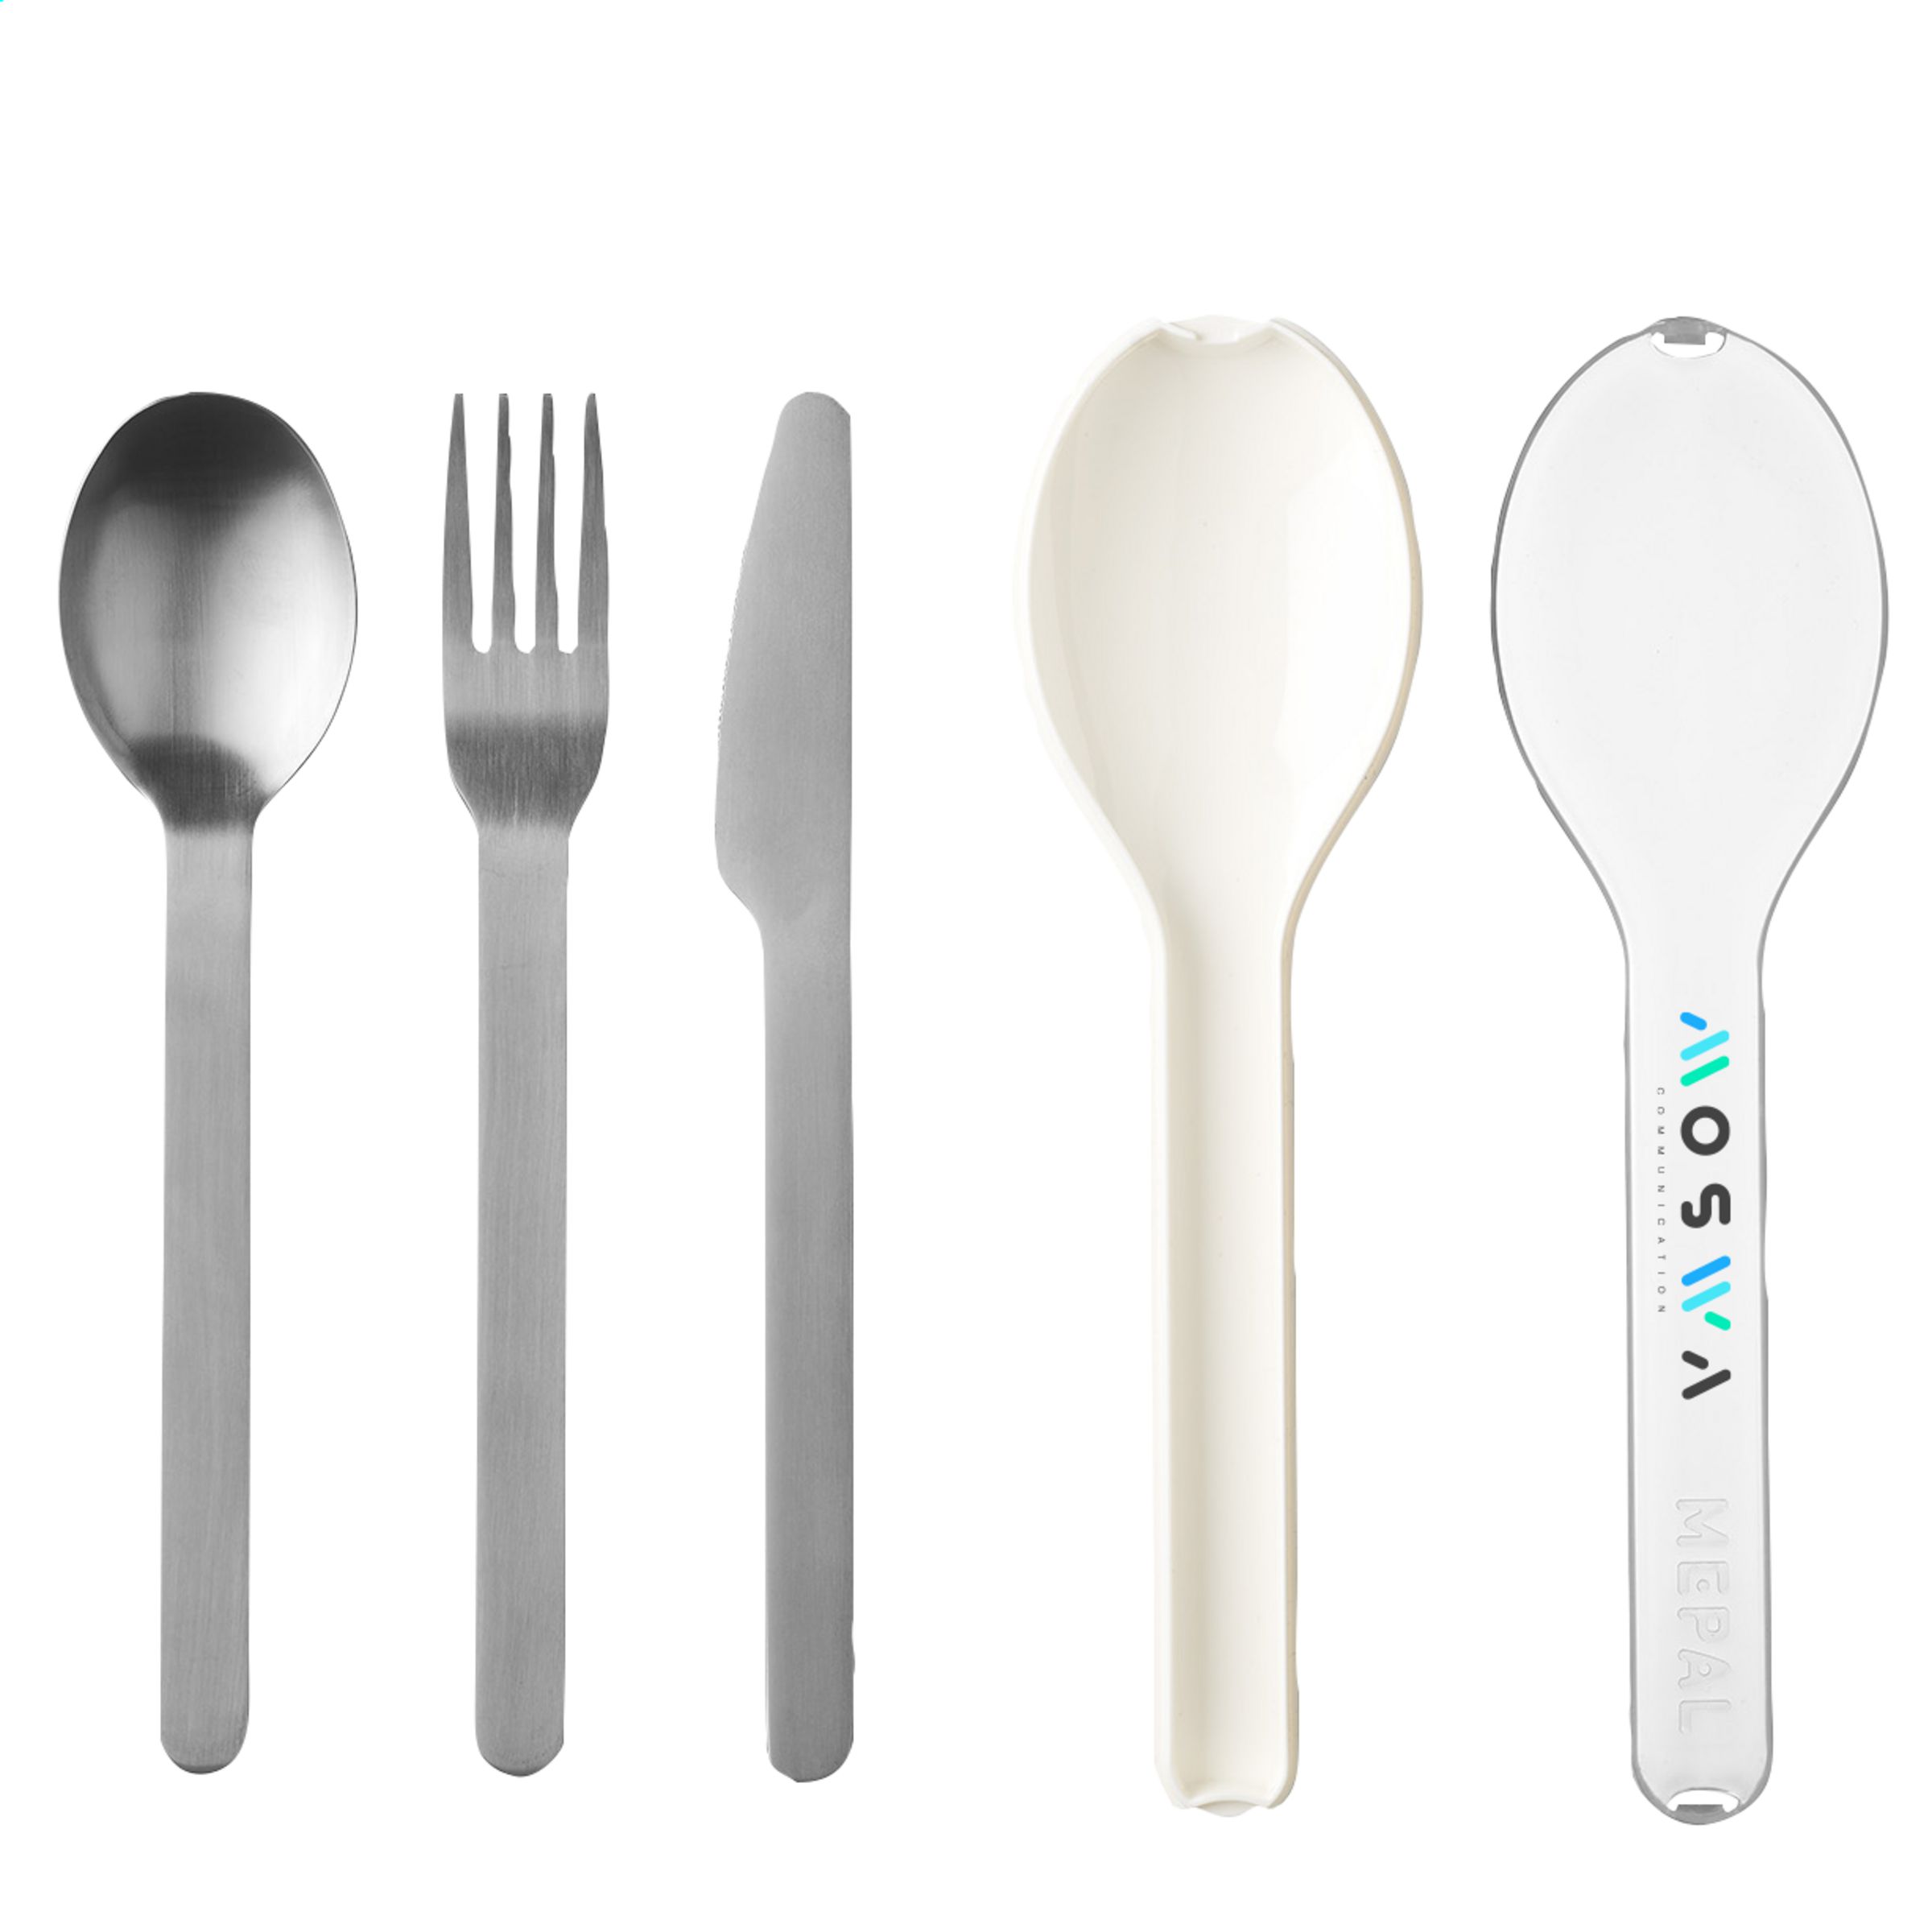 This is a cutlery set made of stainless steel by Mepal. The set comes in a compact plastic container for easy storage and transport. - Grendon